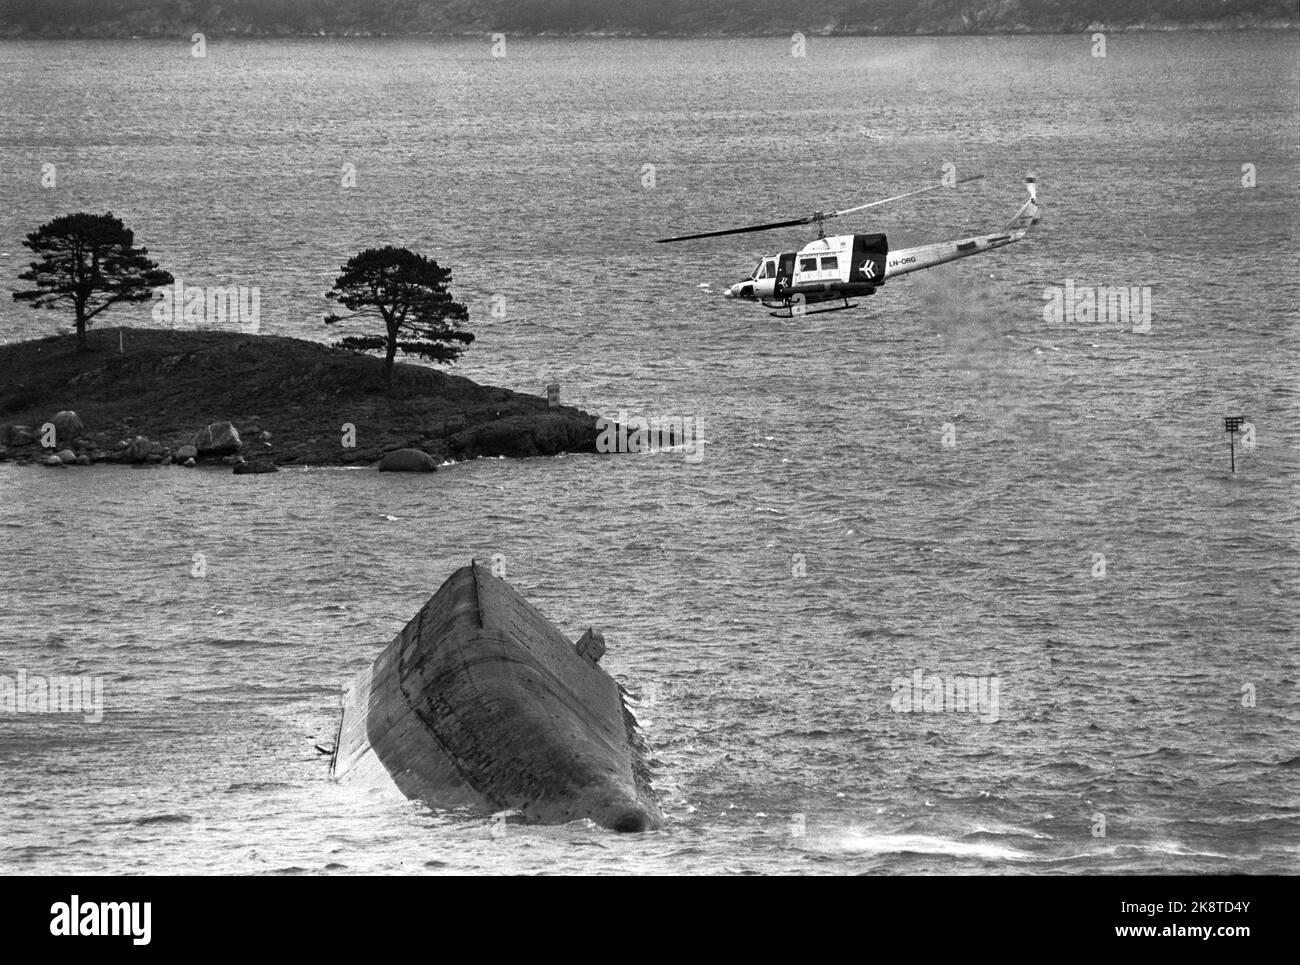 Stavanger 19851105: The cement vessel Concem crashed during the work on Gullfaks B Platform in the Gandsfjord, and 10 people perished. Here the overturned cement bargain. Helicopter is looking for the missing / dead. Photo: Jens O. Kvale / NTB / NTB Stock Photo